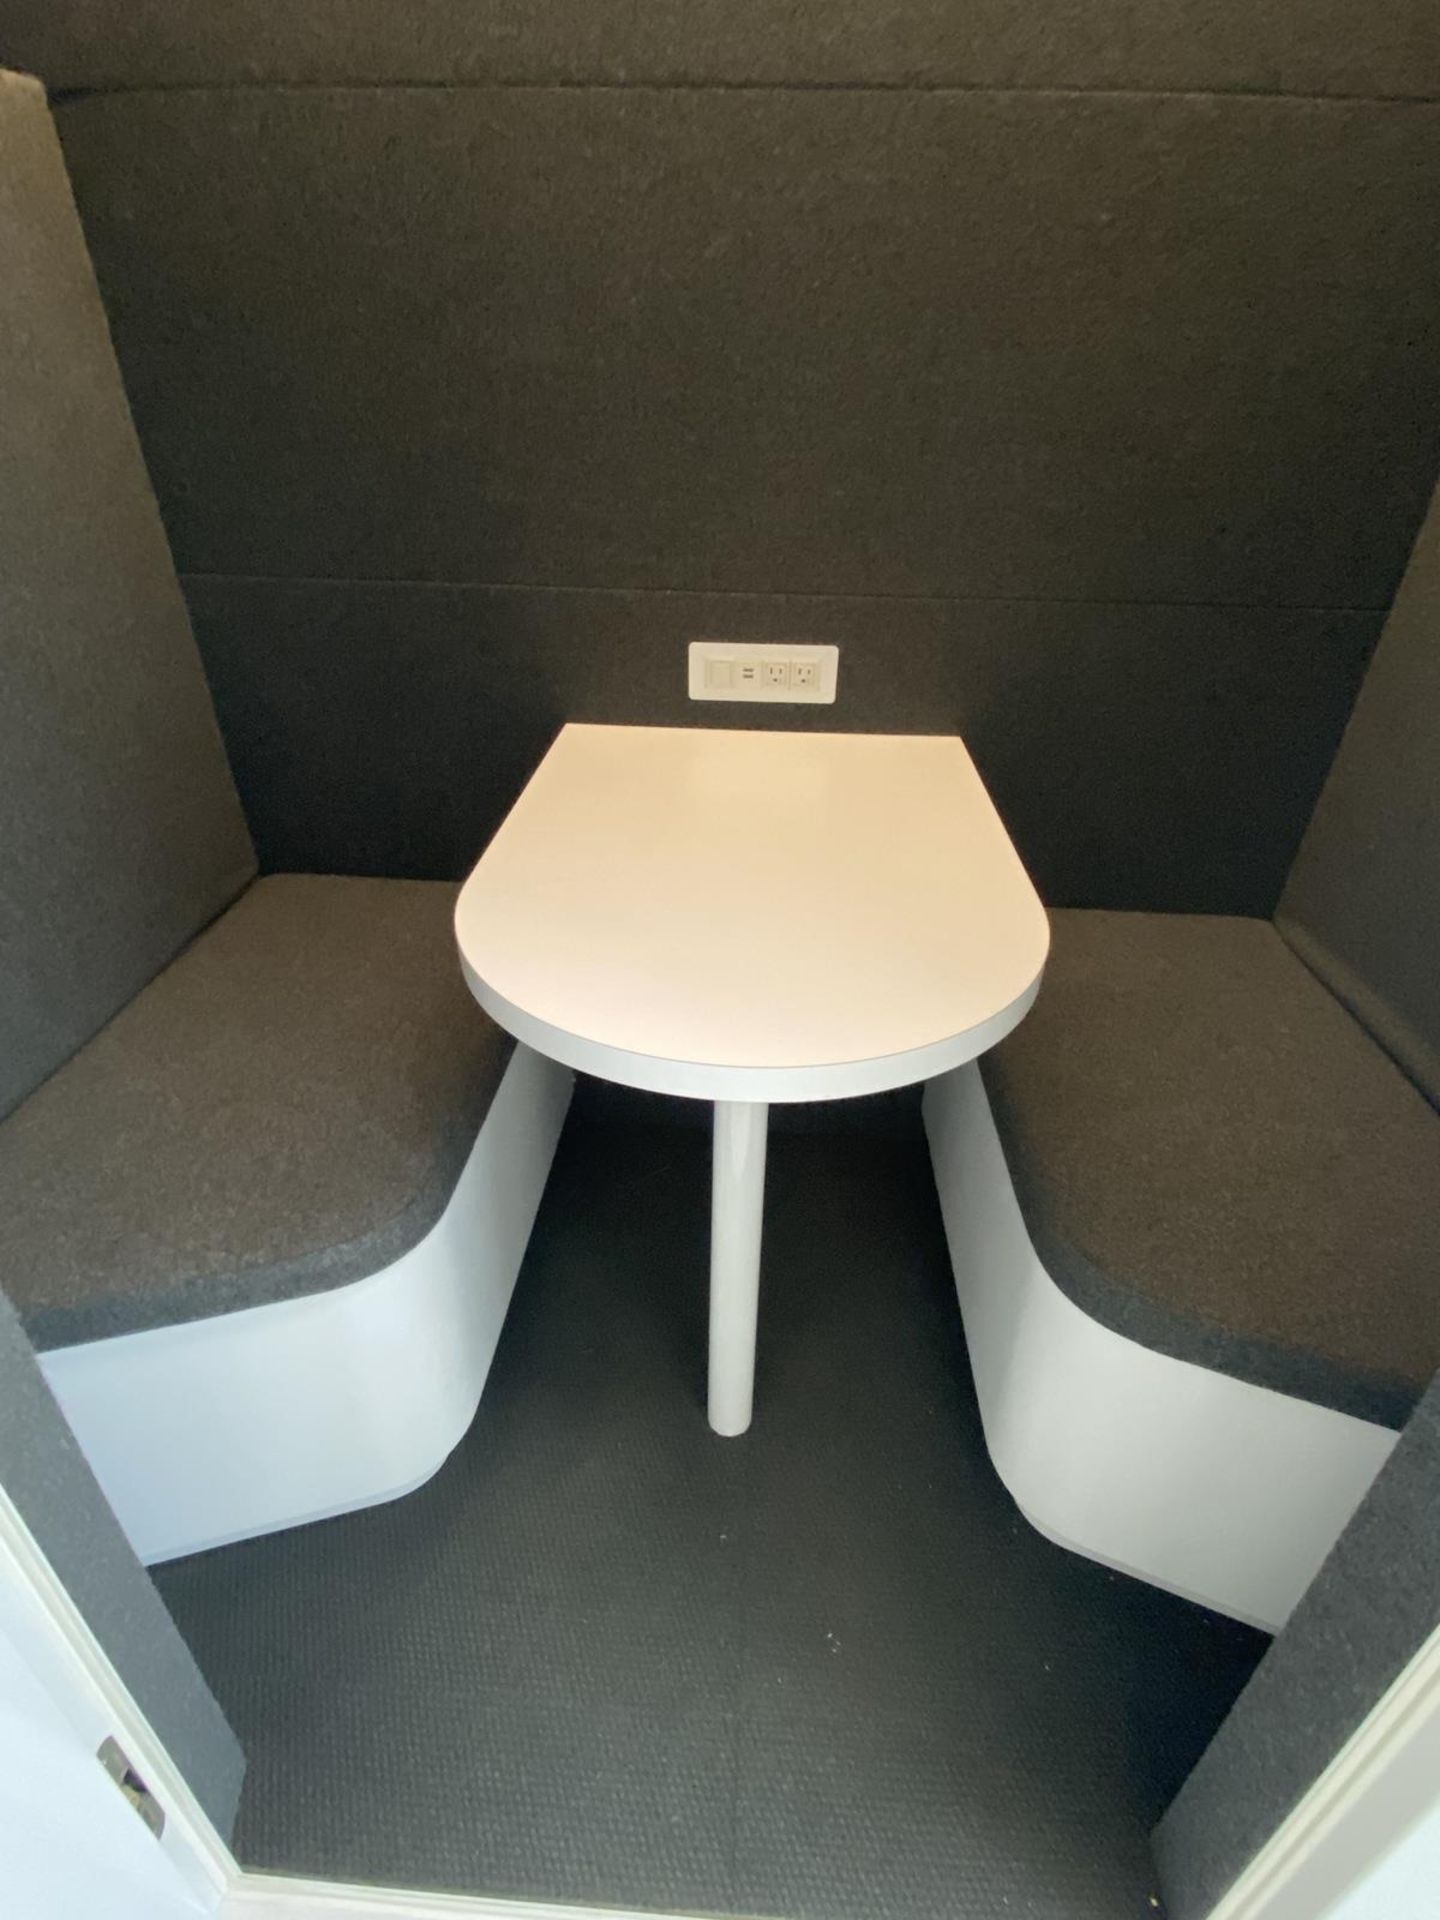 (1) Jabbrrbox Twin StationTechnology Equipped Workspace That is Plush, and Quiet - Image 2 of 2